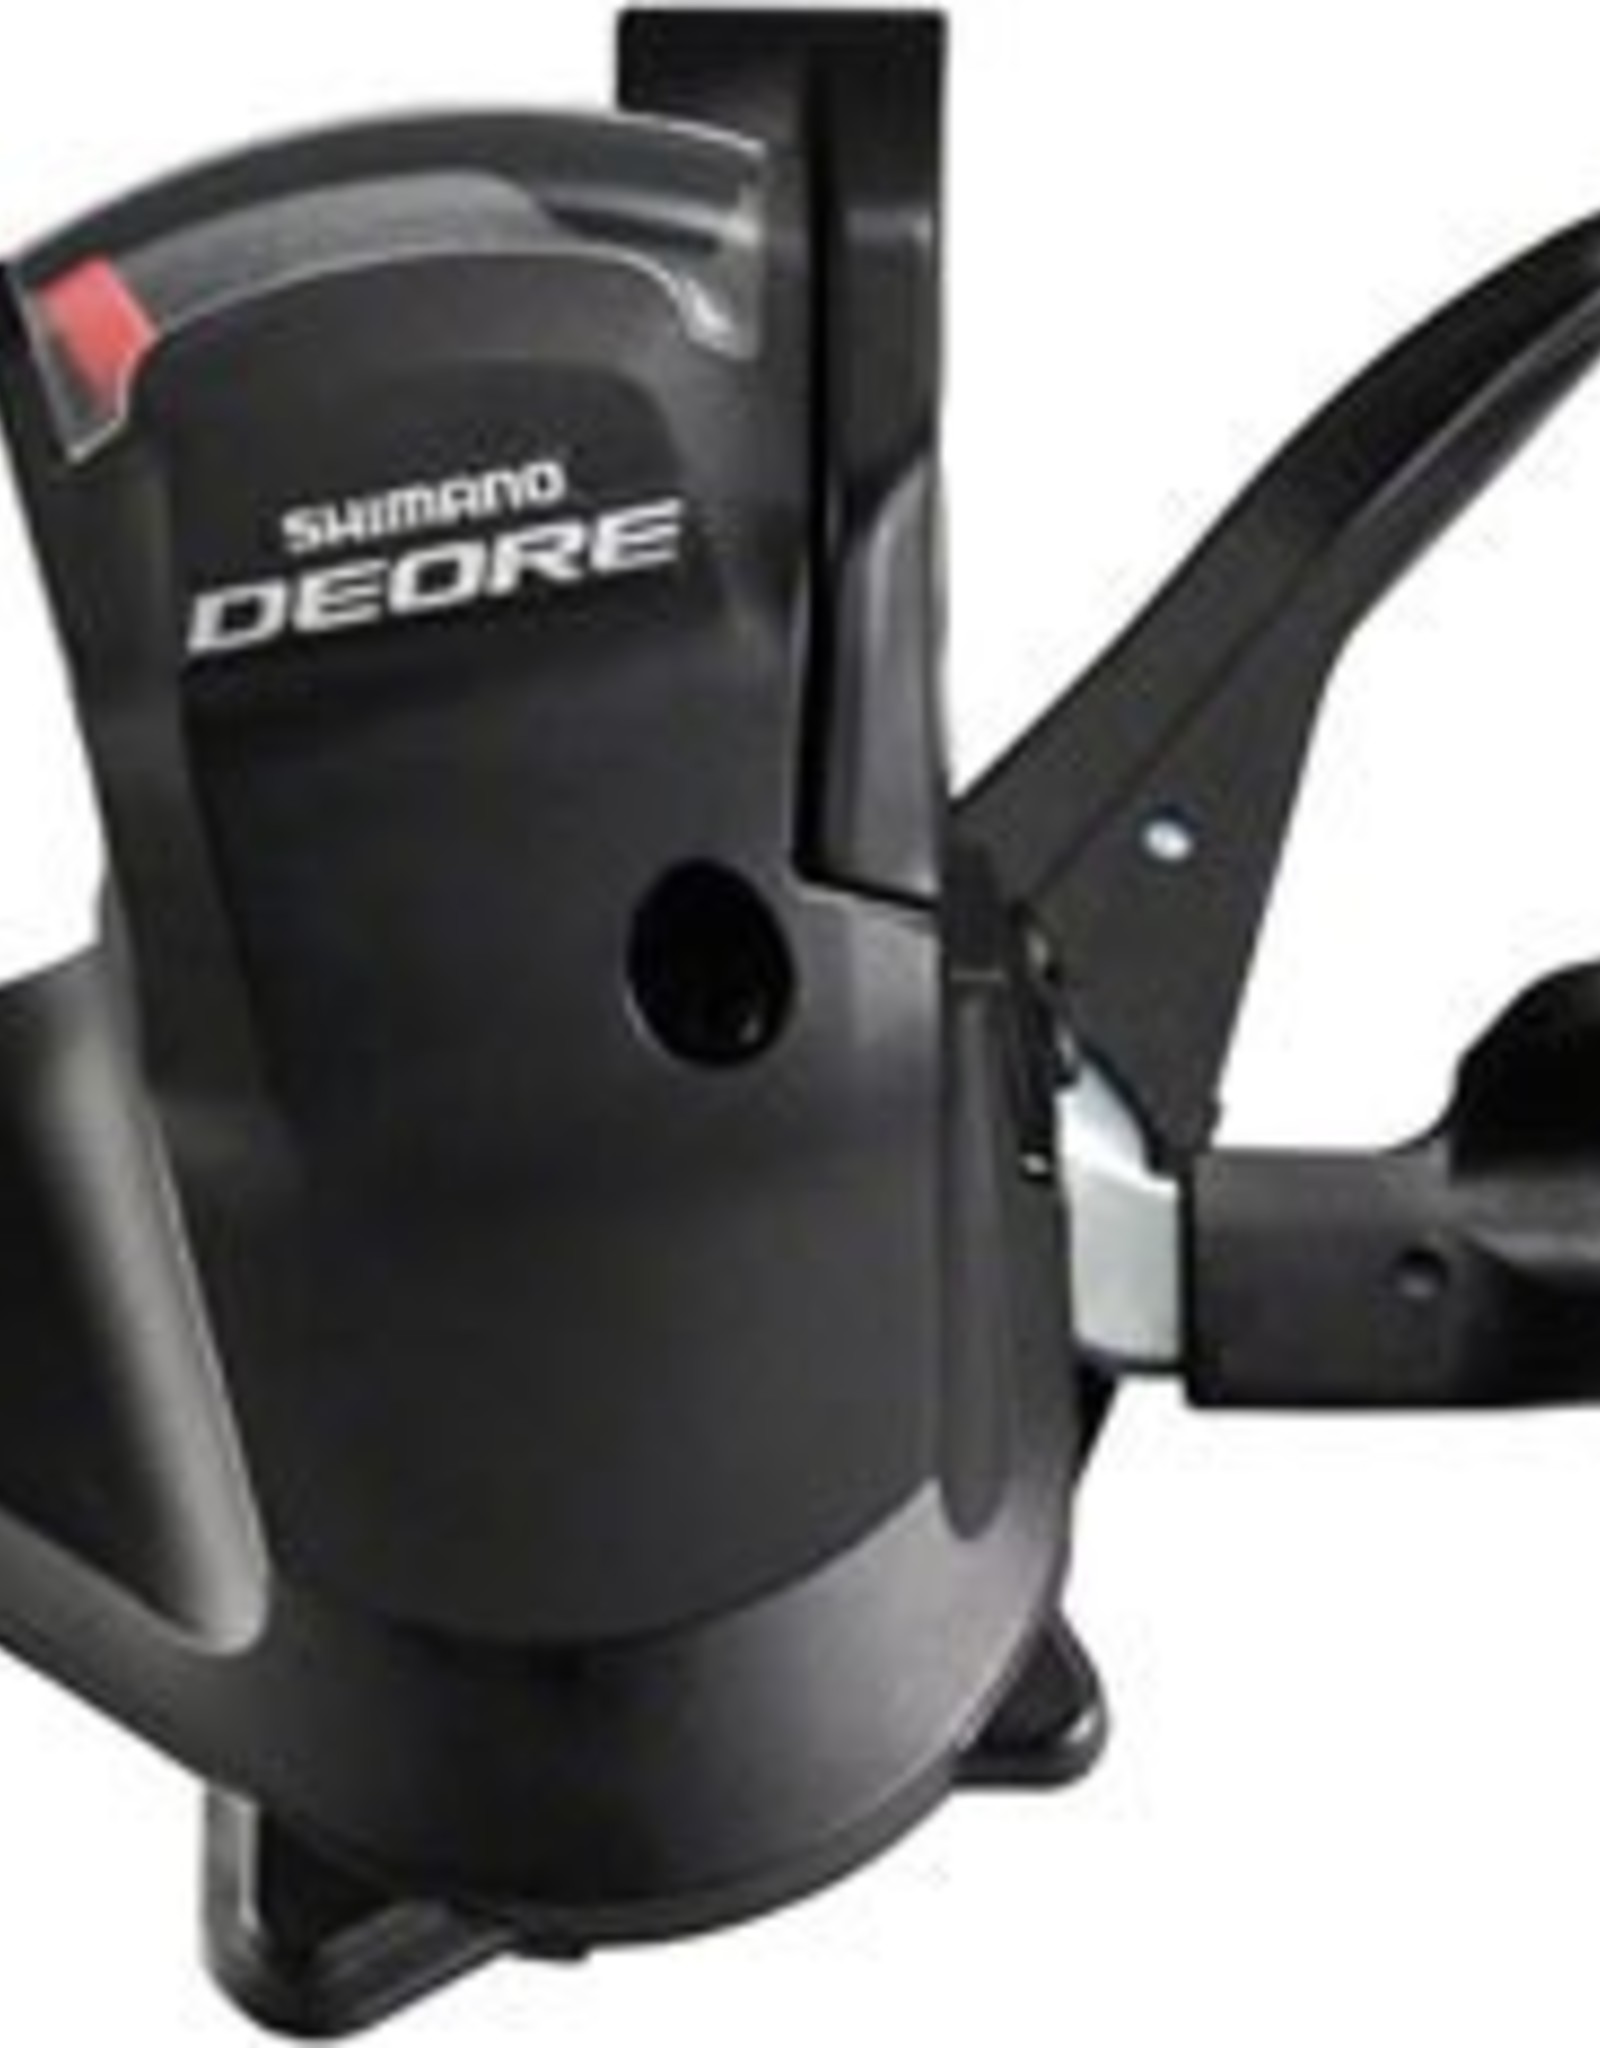 deore shifter